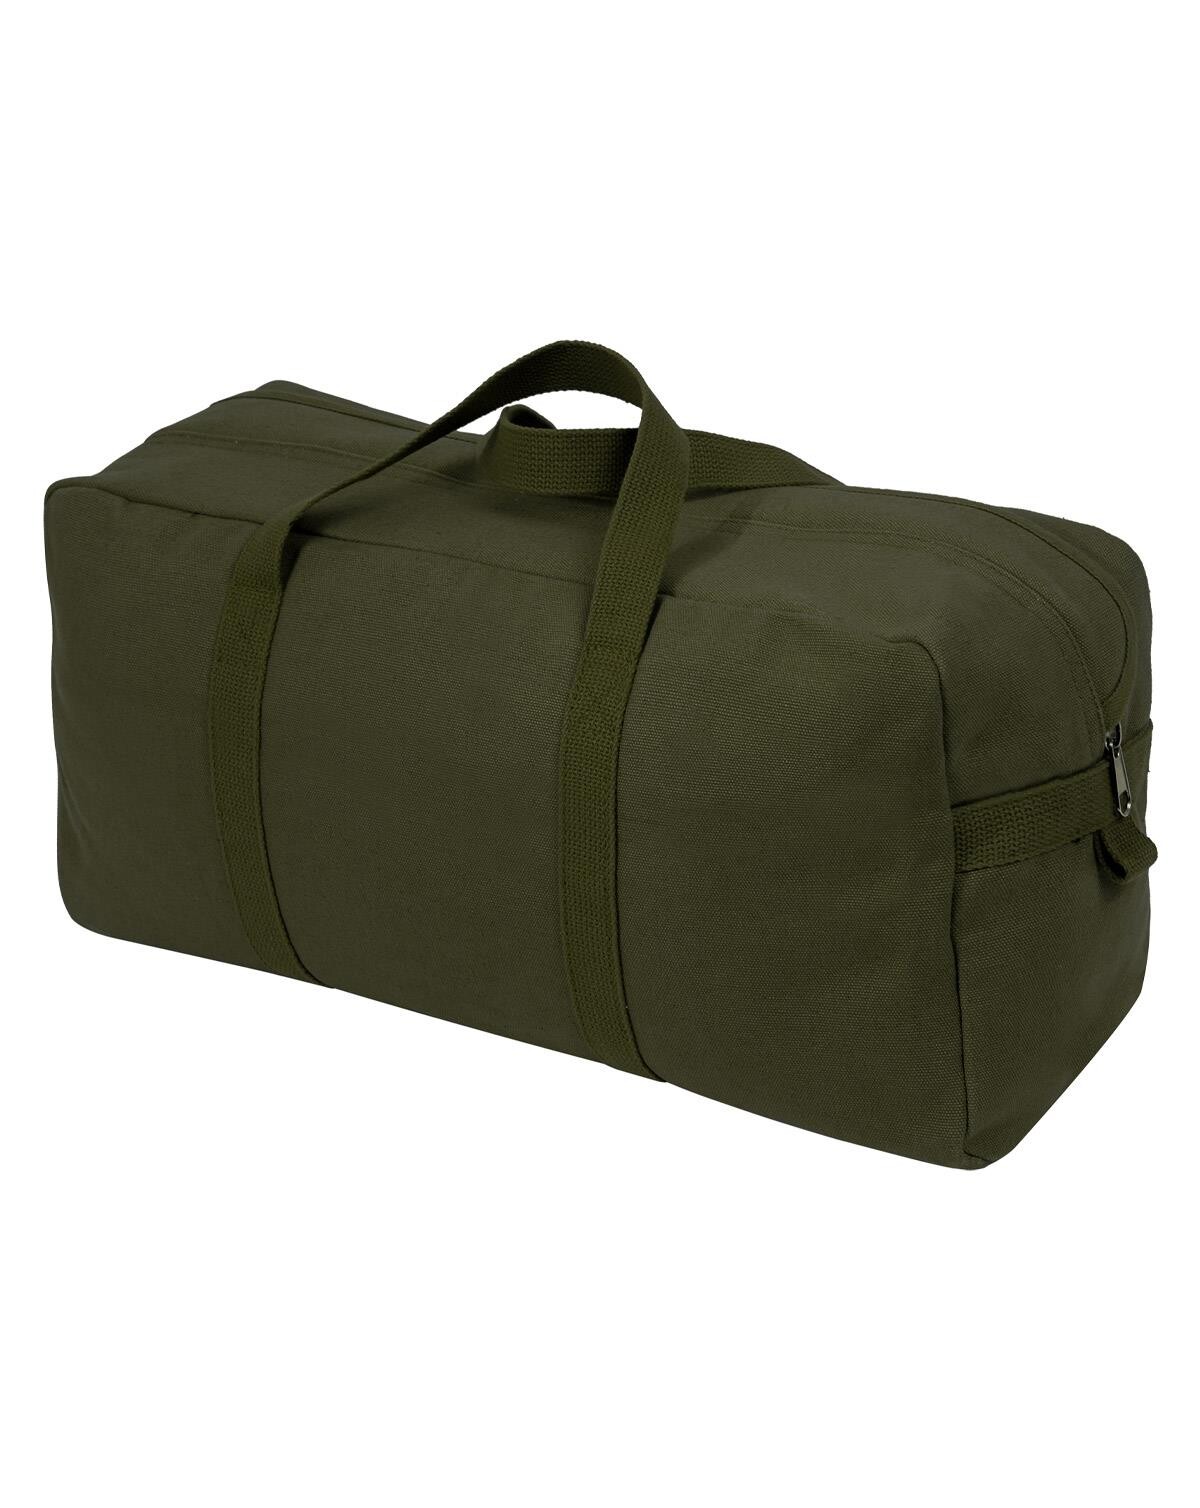 9: Rothco Canvas Sportstaske - Tanker Style (Oliven, One Size)